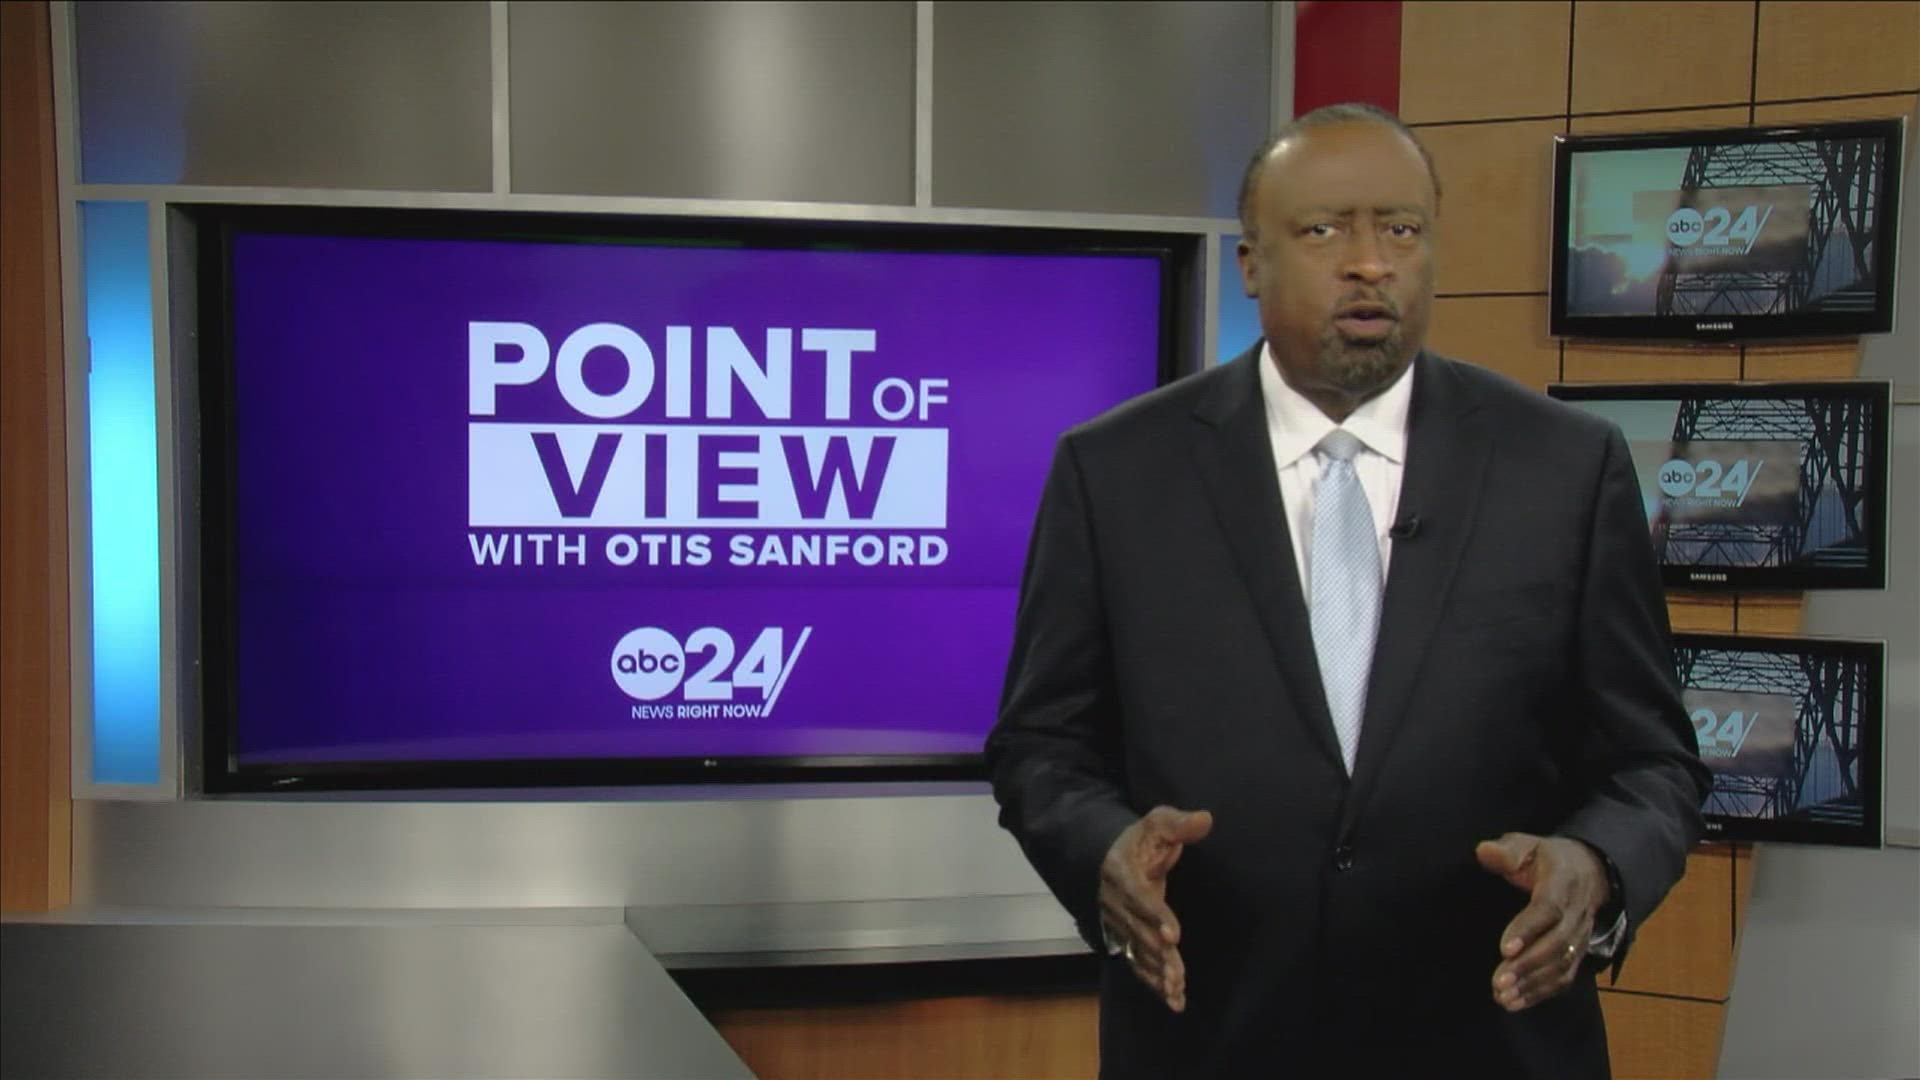 ABC 24 political analyst and commentator Otis Sanford shared his point of view on a battle over three public schools in Germantown.